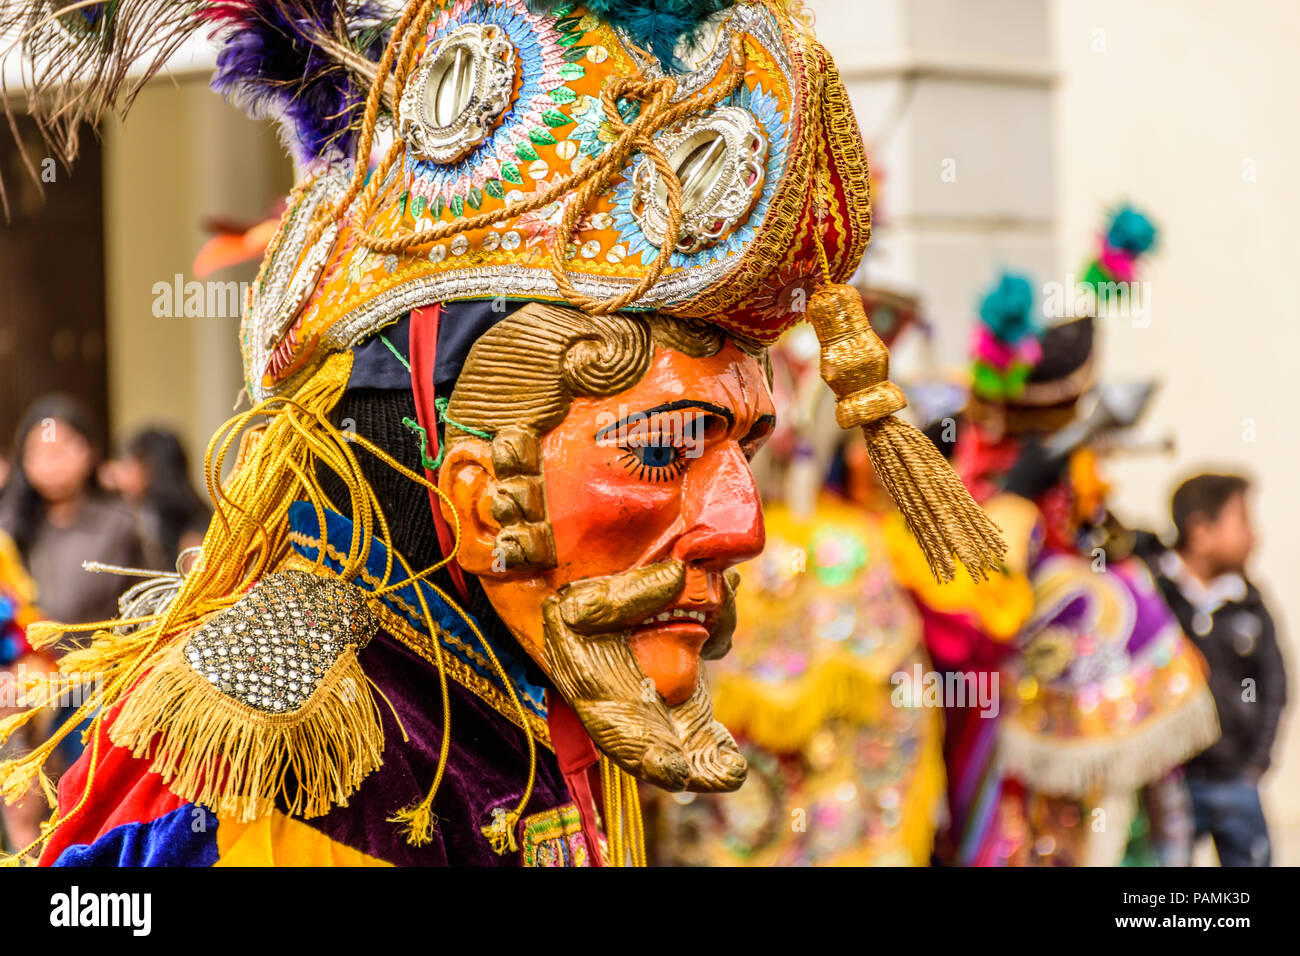 Parramos, Guatemala - December 28, 2016: Traditional folk dancer in mask & costume for Dance of the Moors & Christians near colonial Antigua Stock Photo